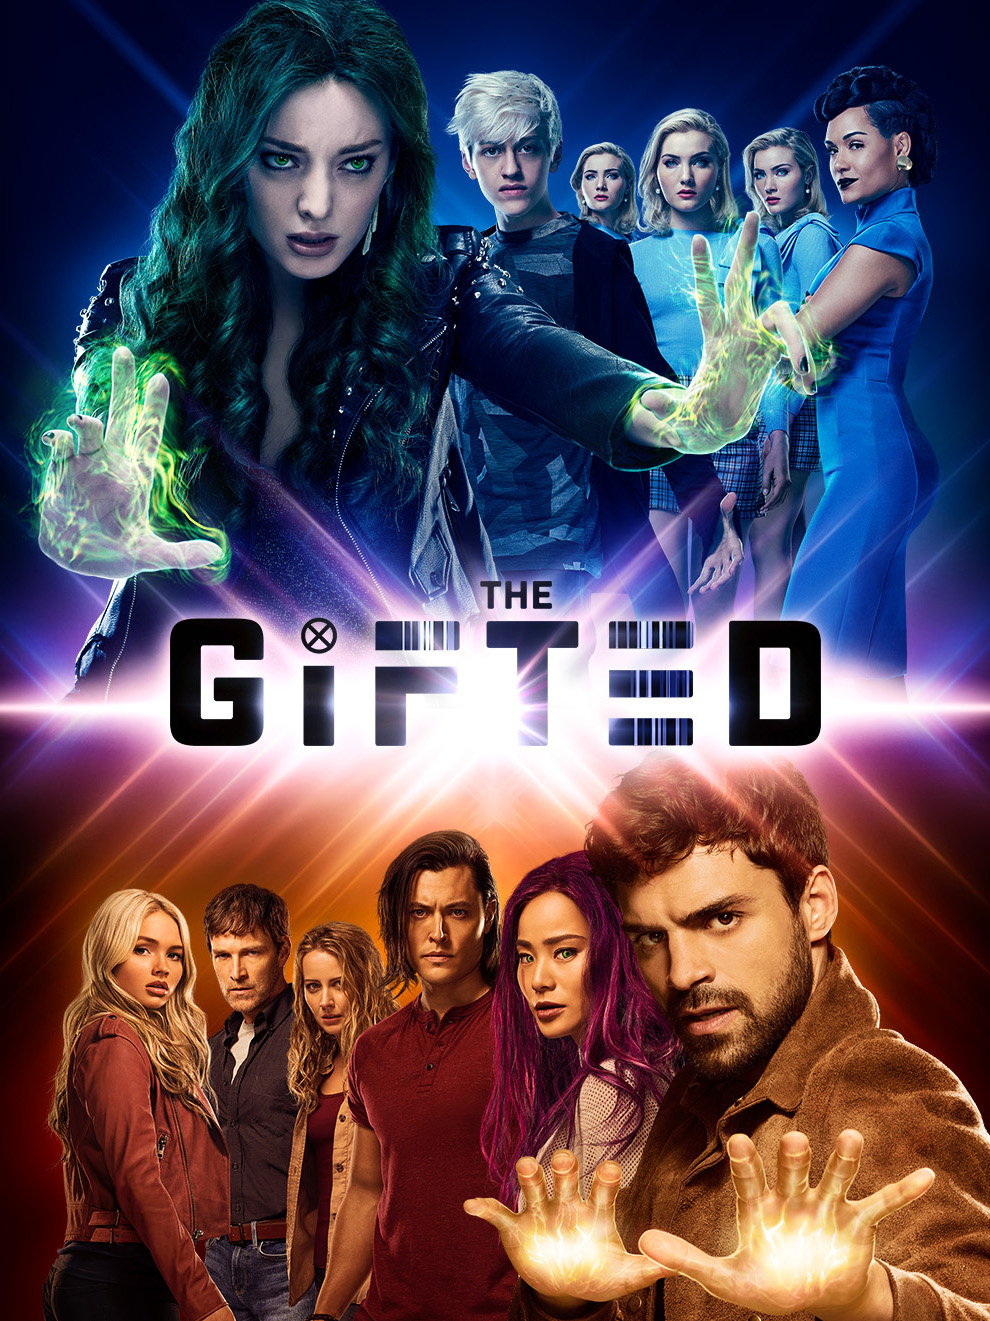 Download The Gifted (2017-19) (Season 1-2) English Series In 480p [150 MB] | 720p [260 MB] | 1080p [900 MB] On Techoffical